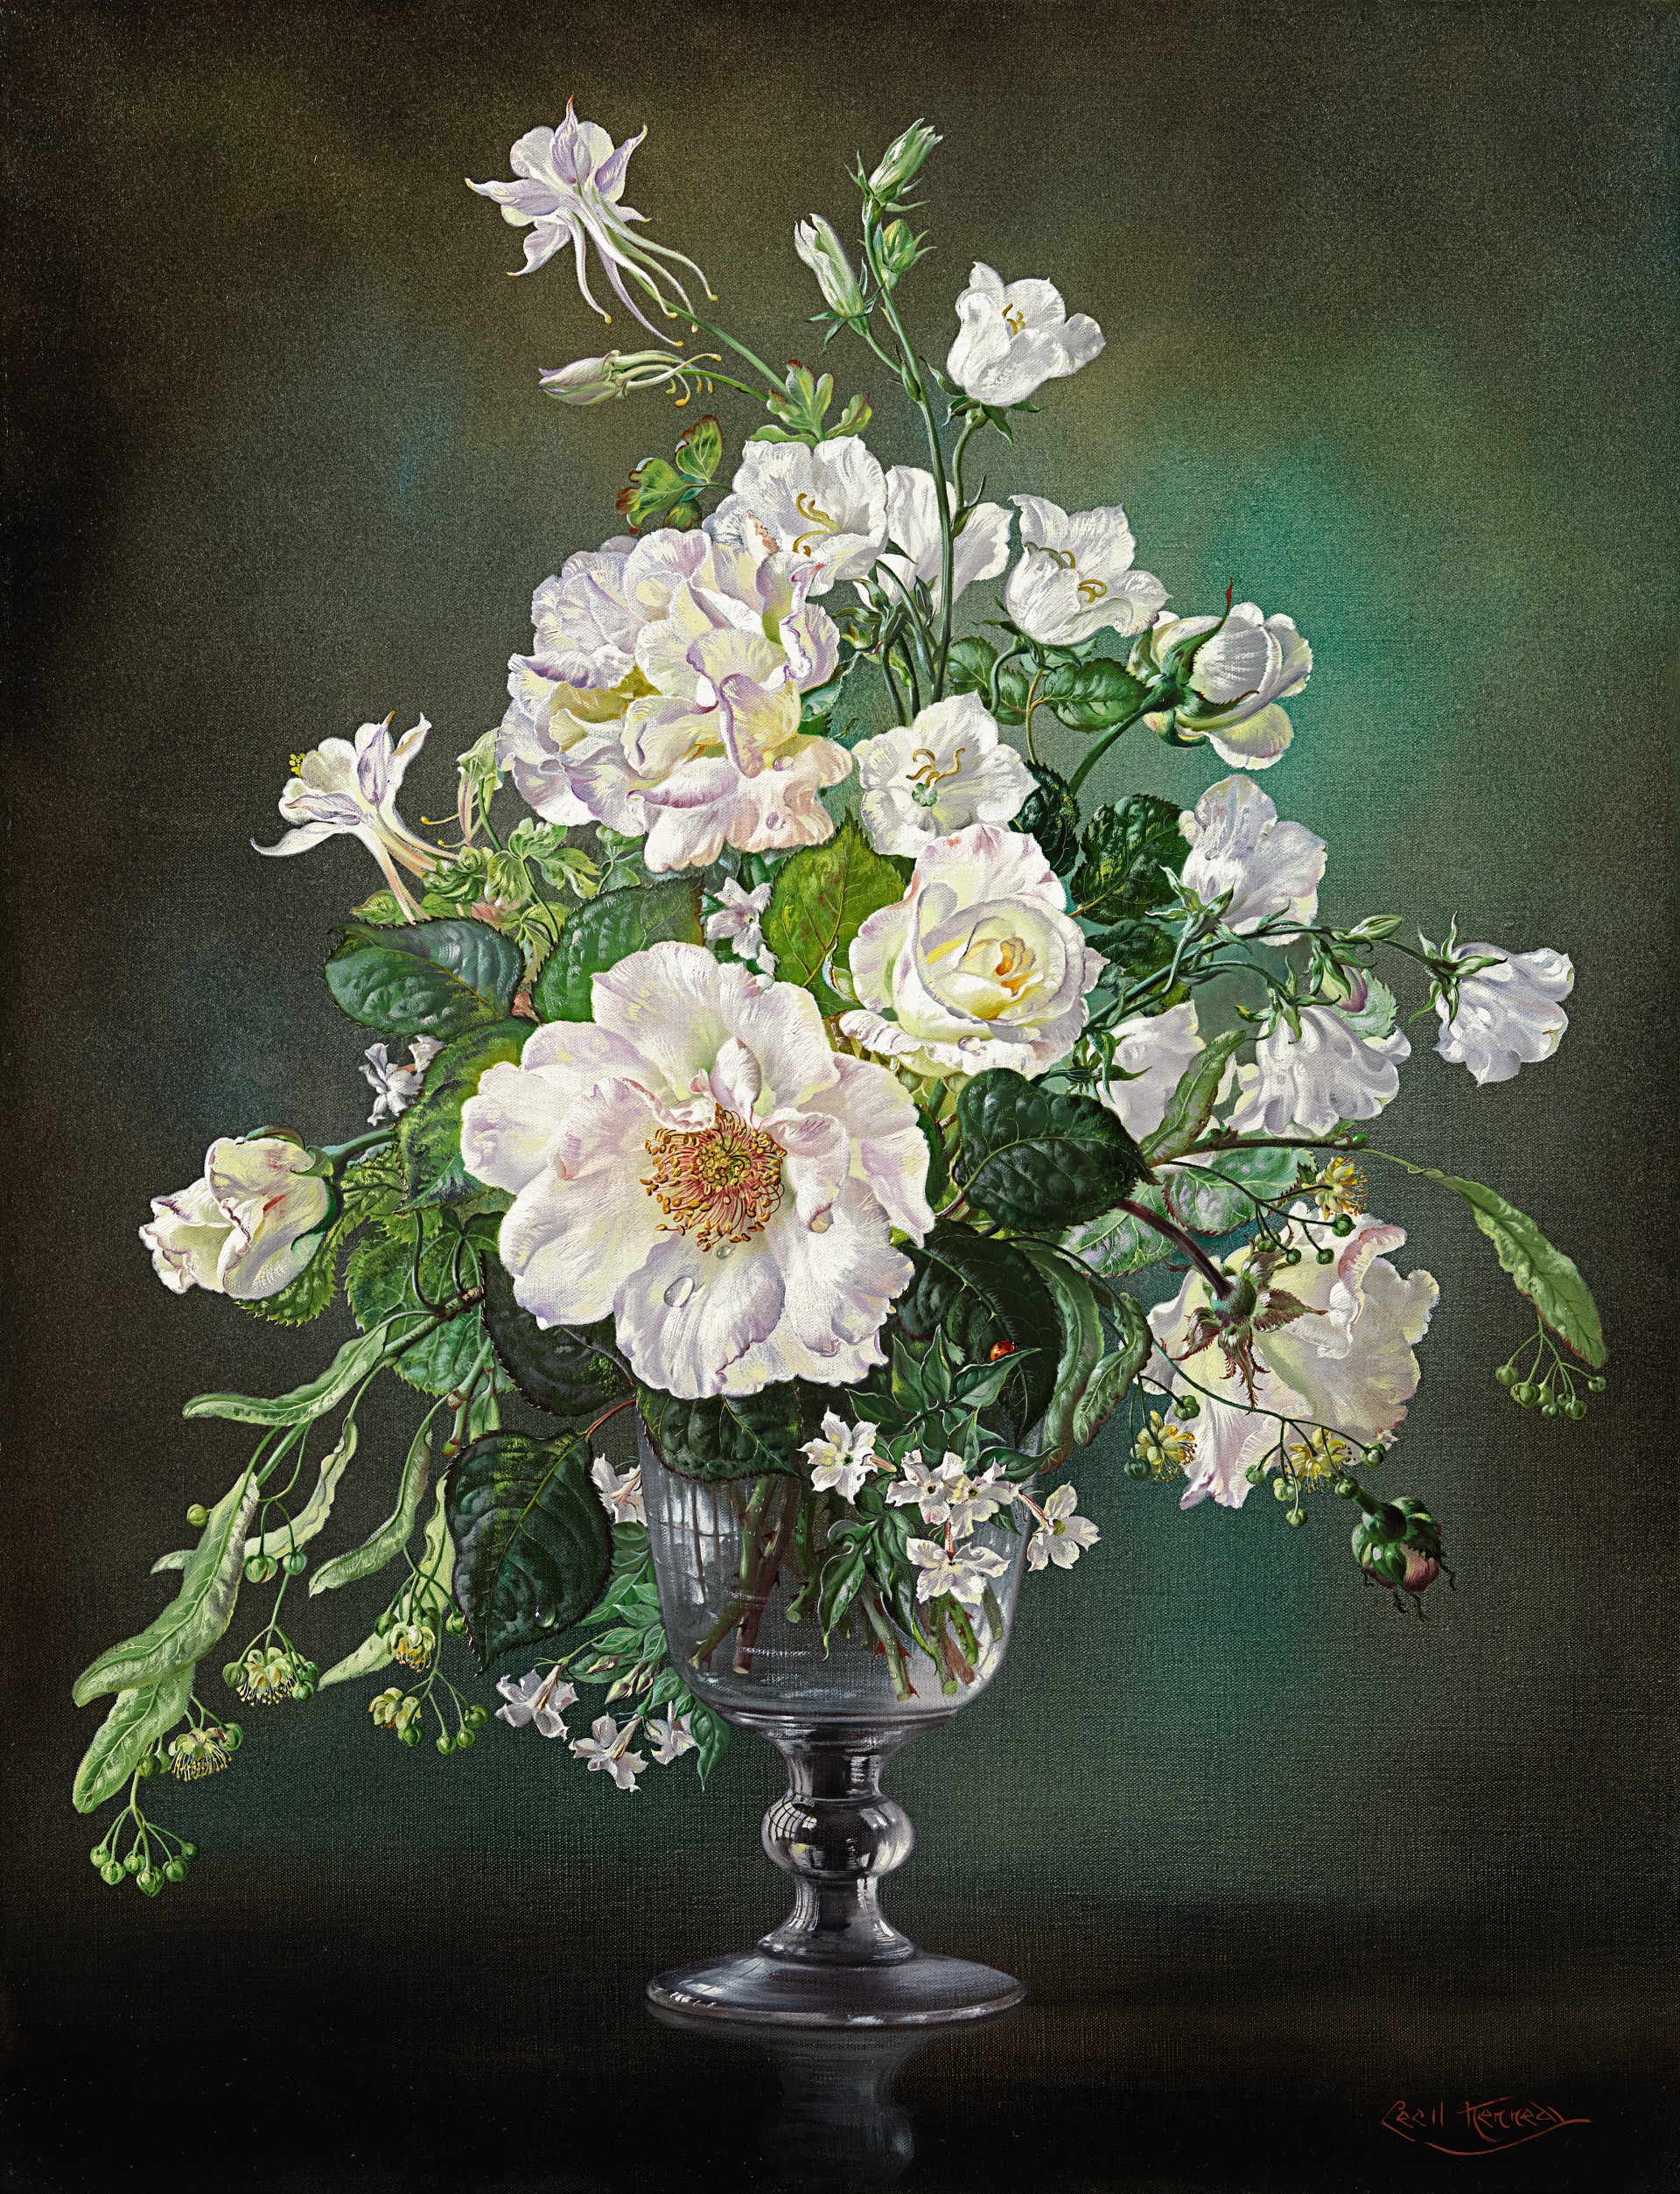 Cecil Kennedy - Still life of white flowers in a glass goblet